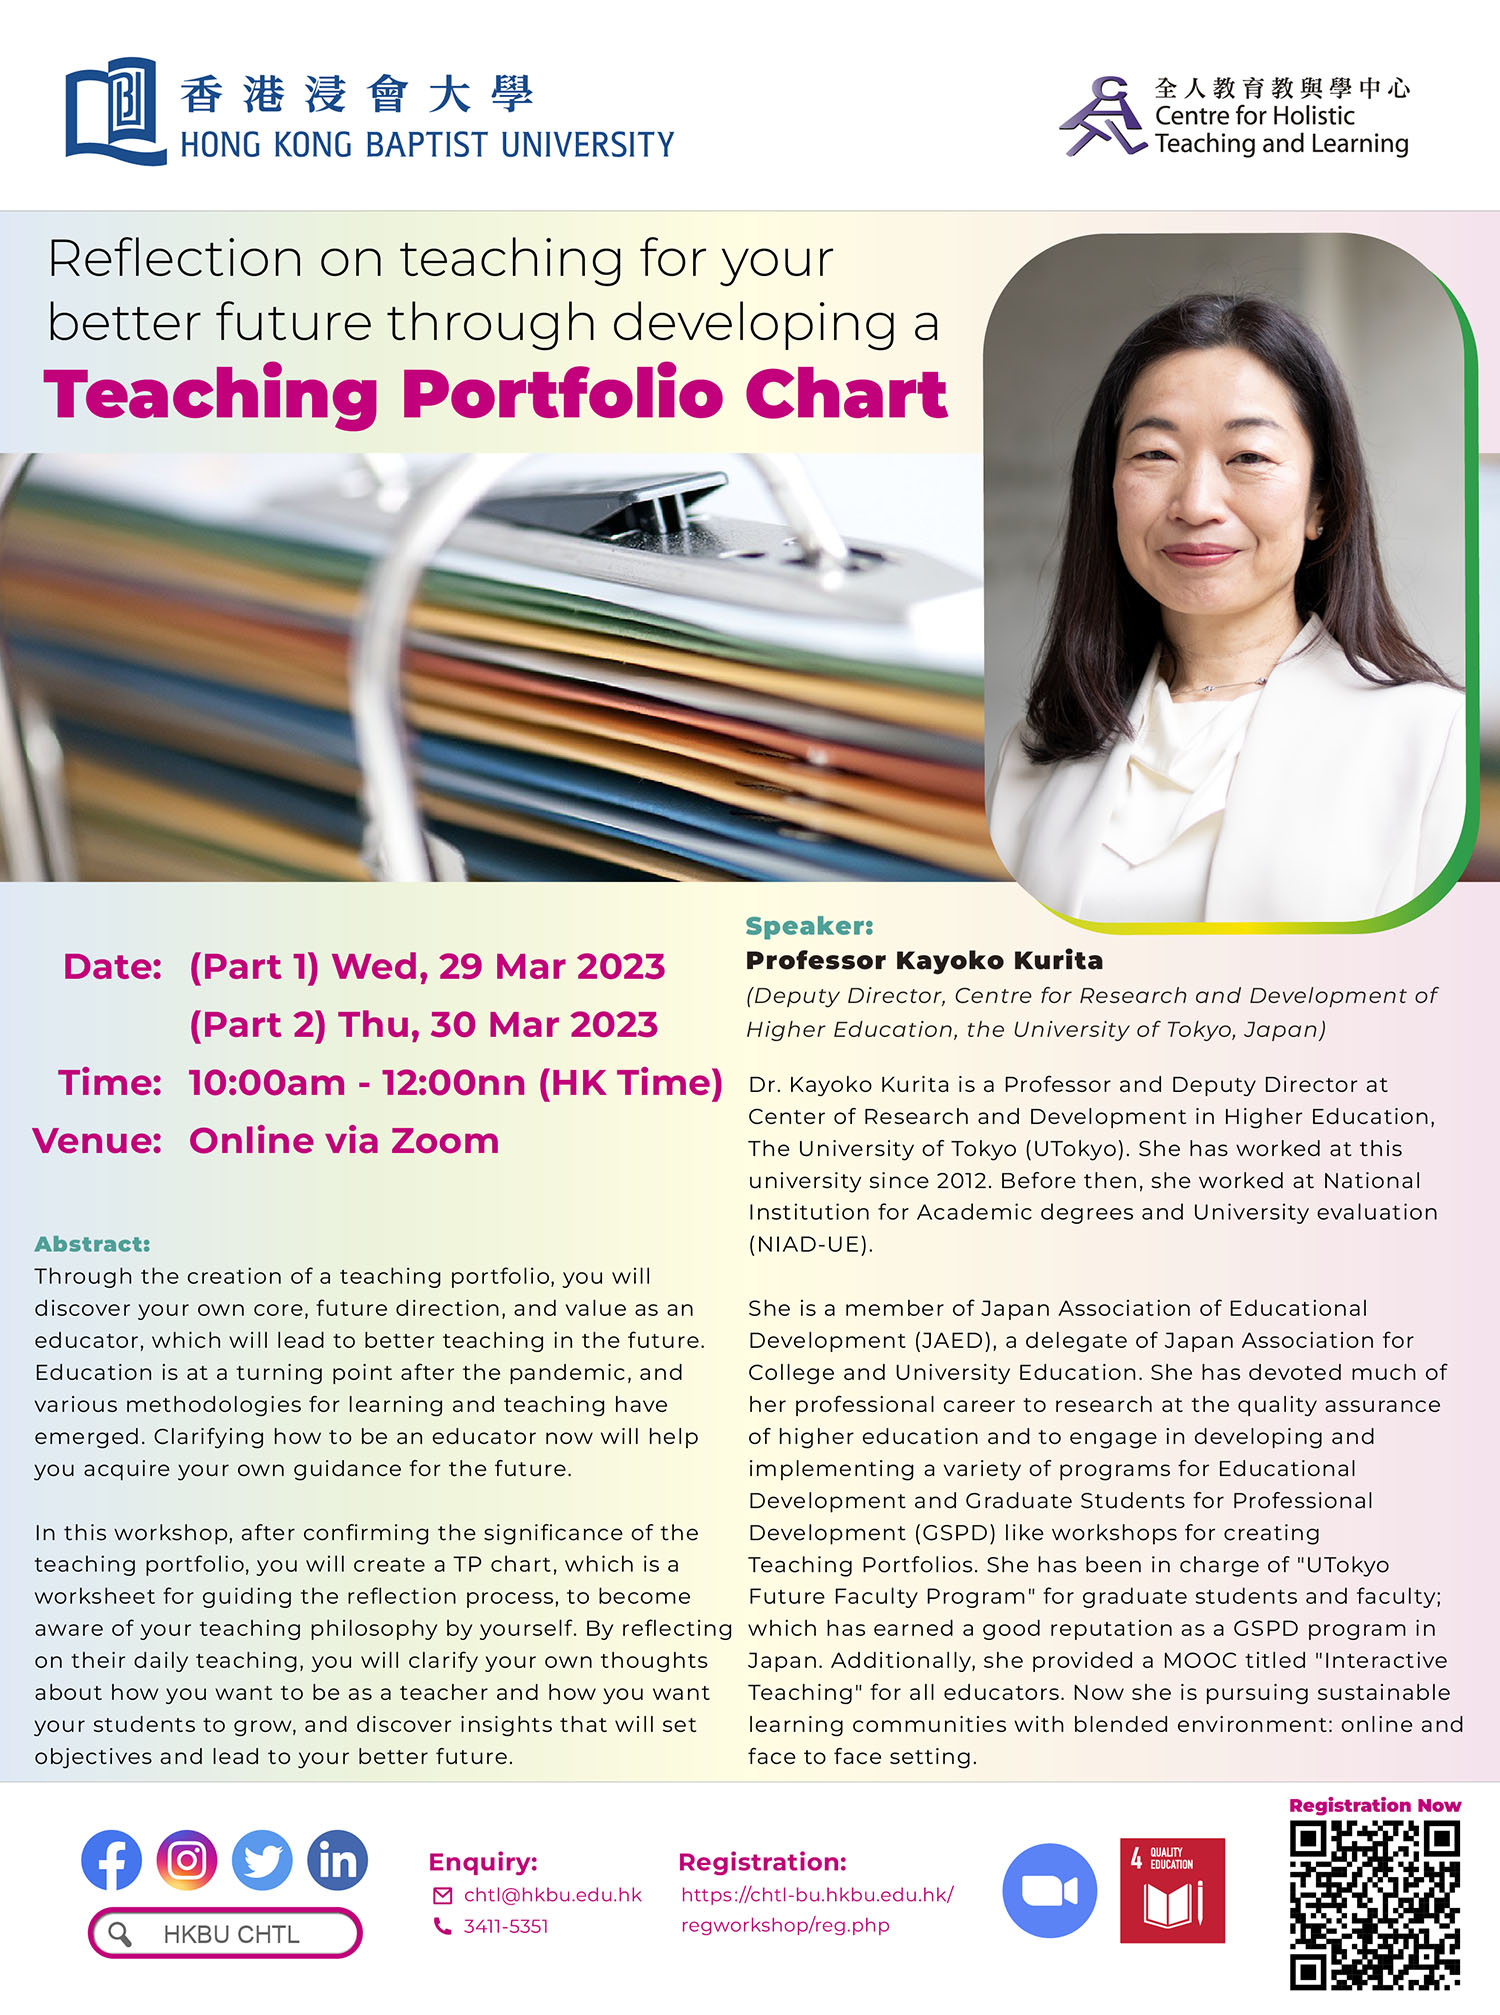 Reflection on teaching for your better future through developing a "Teaching Portfolio Chart" (Part 1 & Part 2)